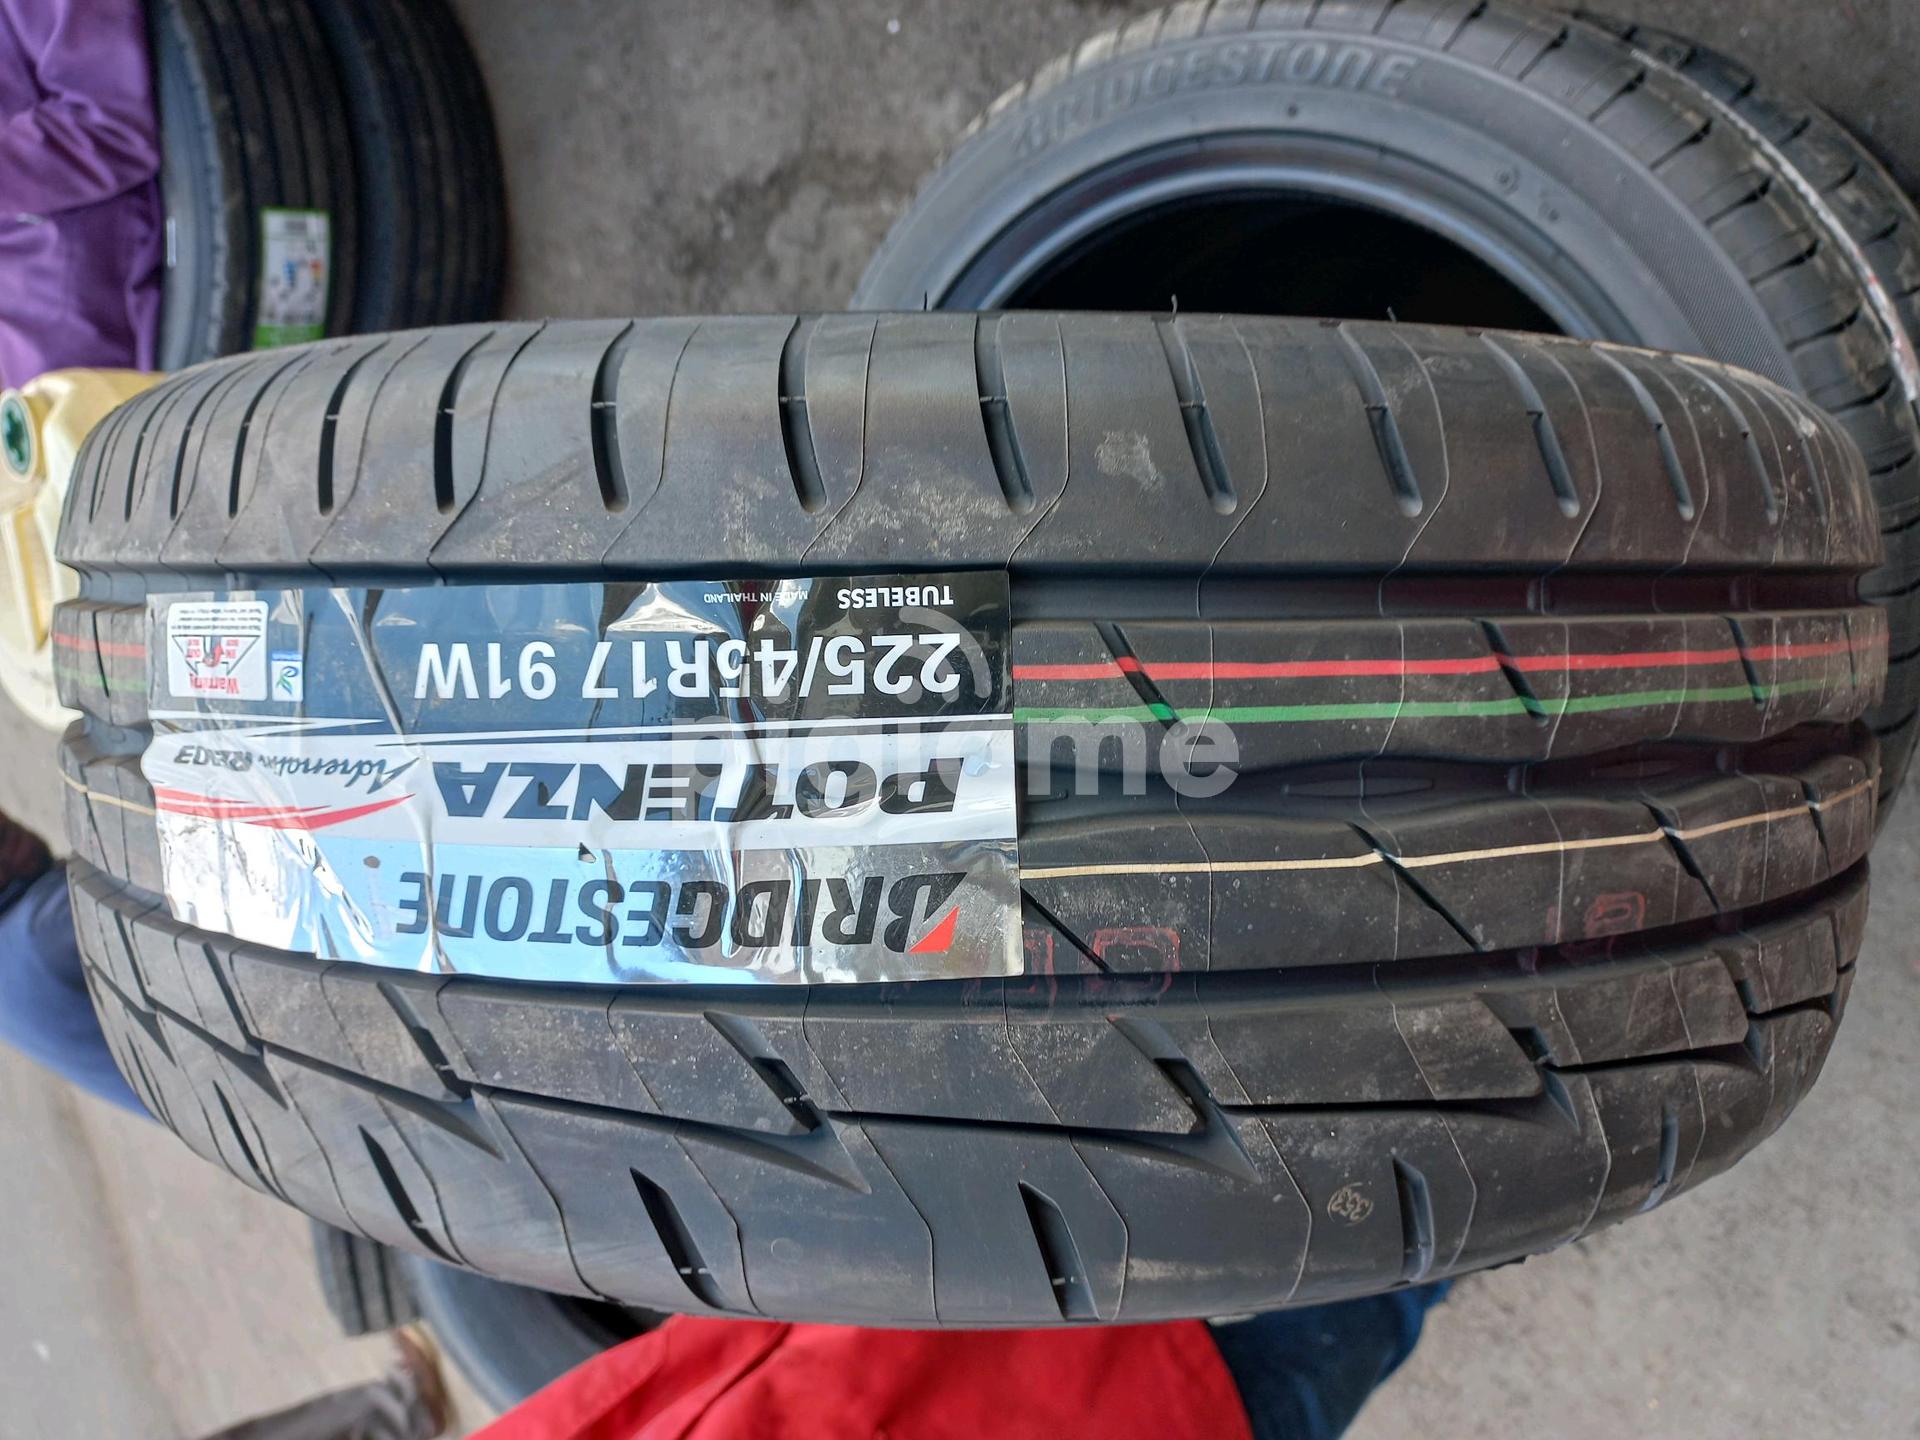 Tire Size 225/45R17